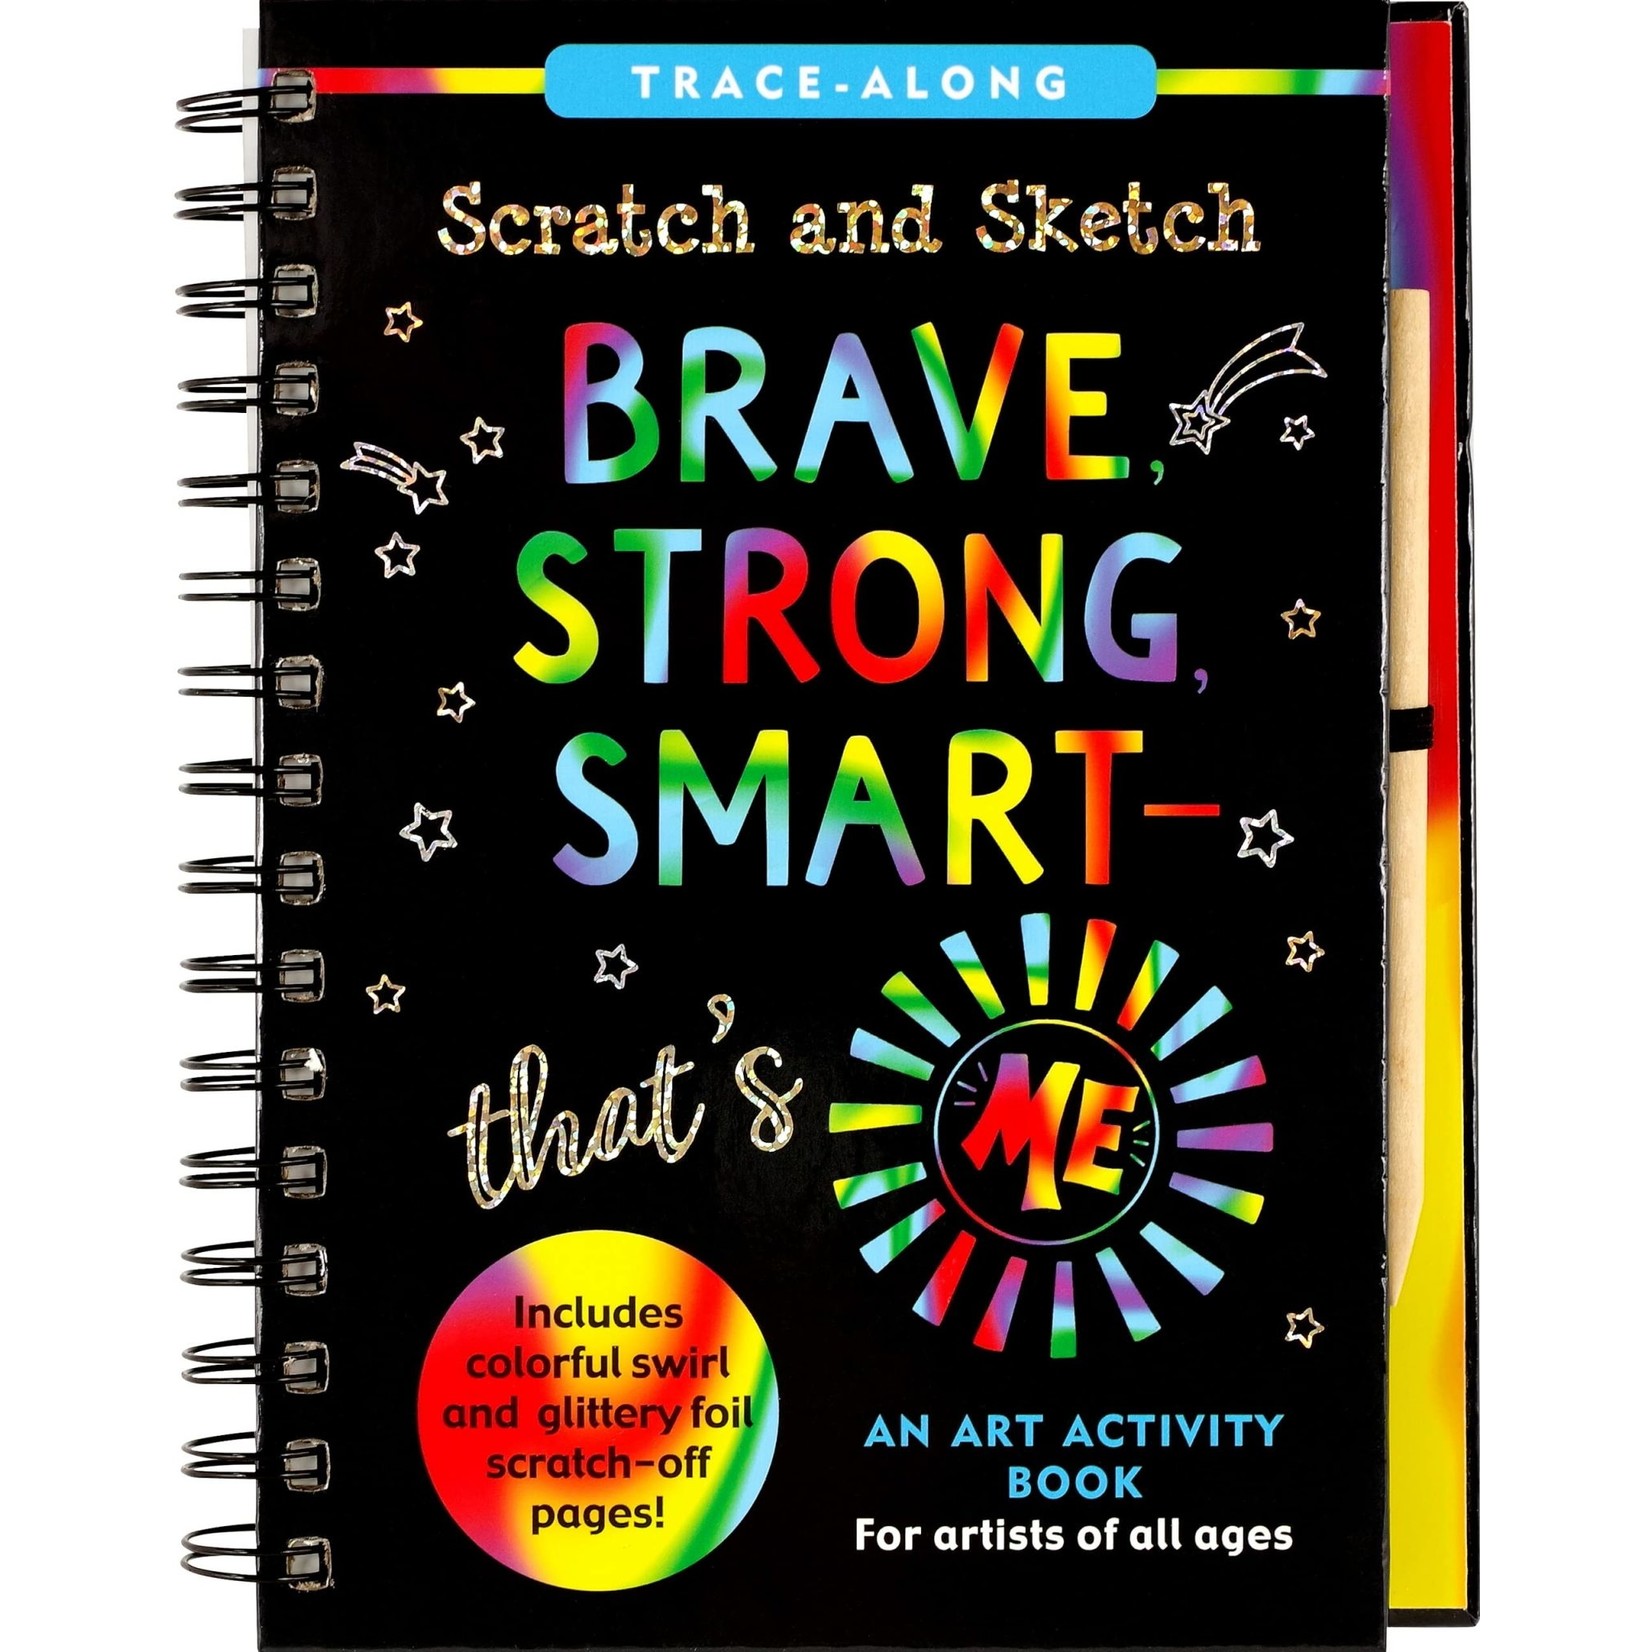 Scratch & Sketch: Brave, Strong, Smart--That's Me (Trace-Along)